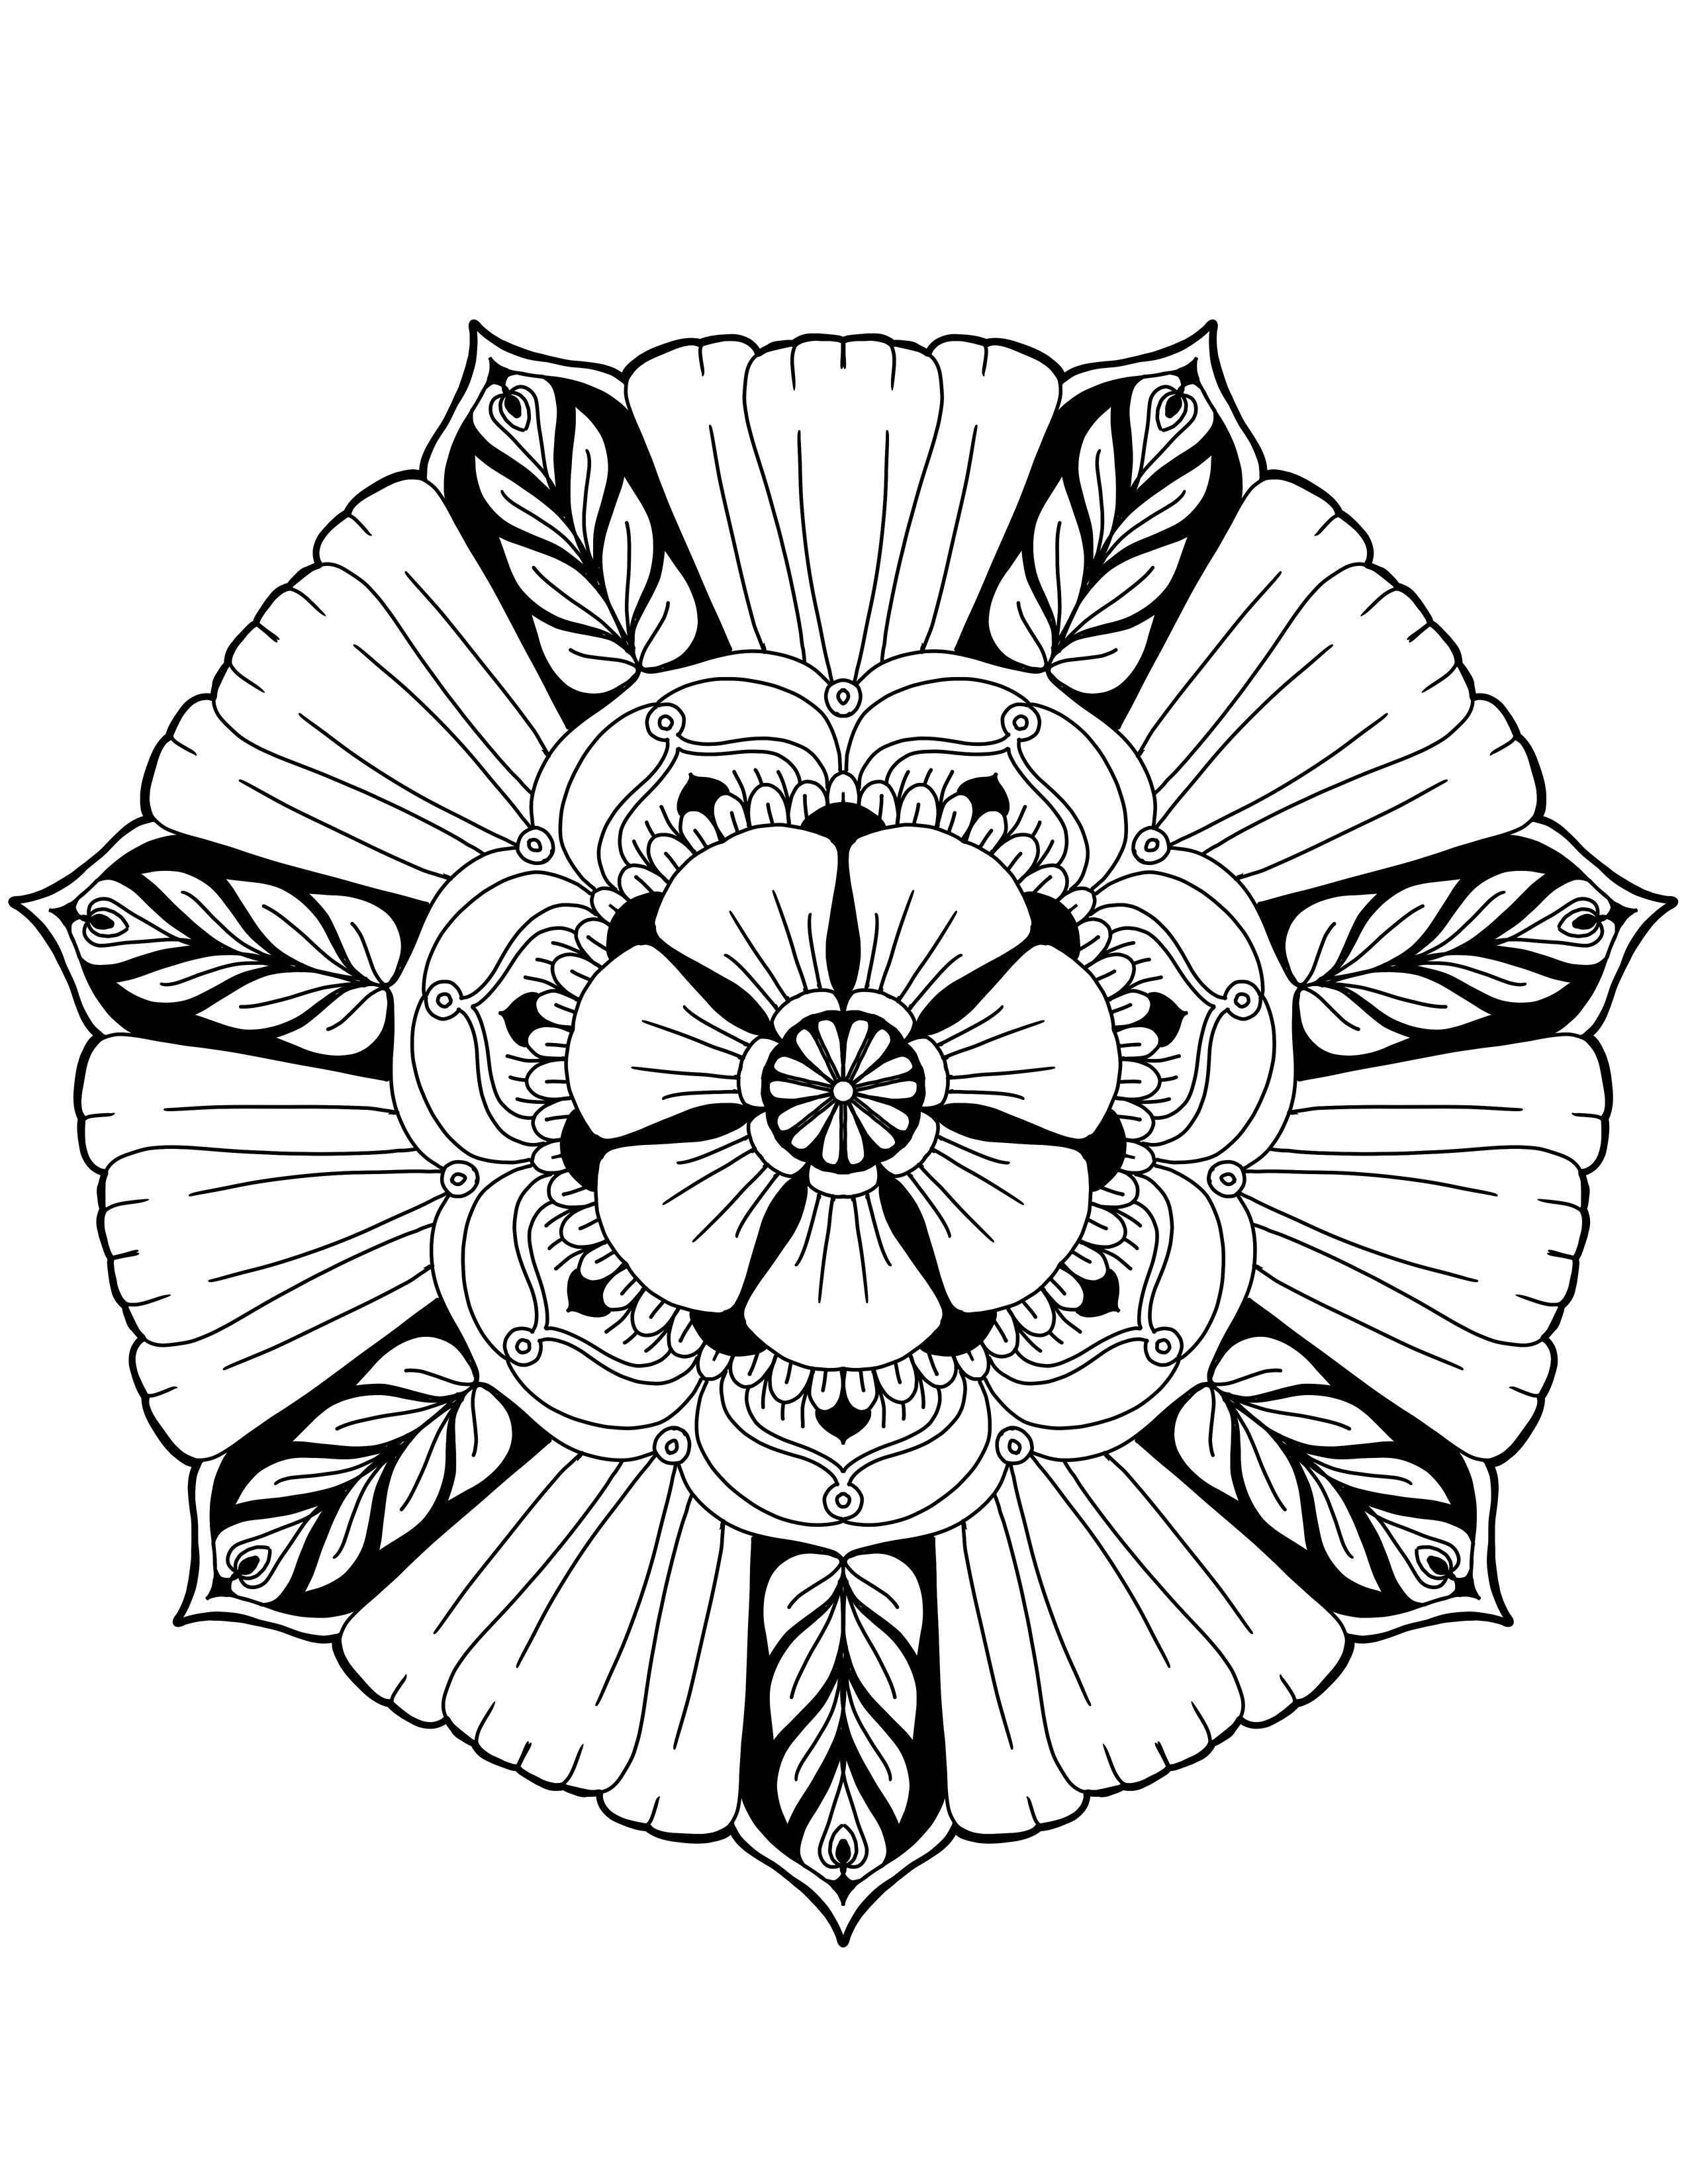 Mandala Drawing Easy | Free download on ClipArtMag